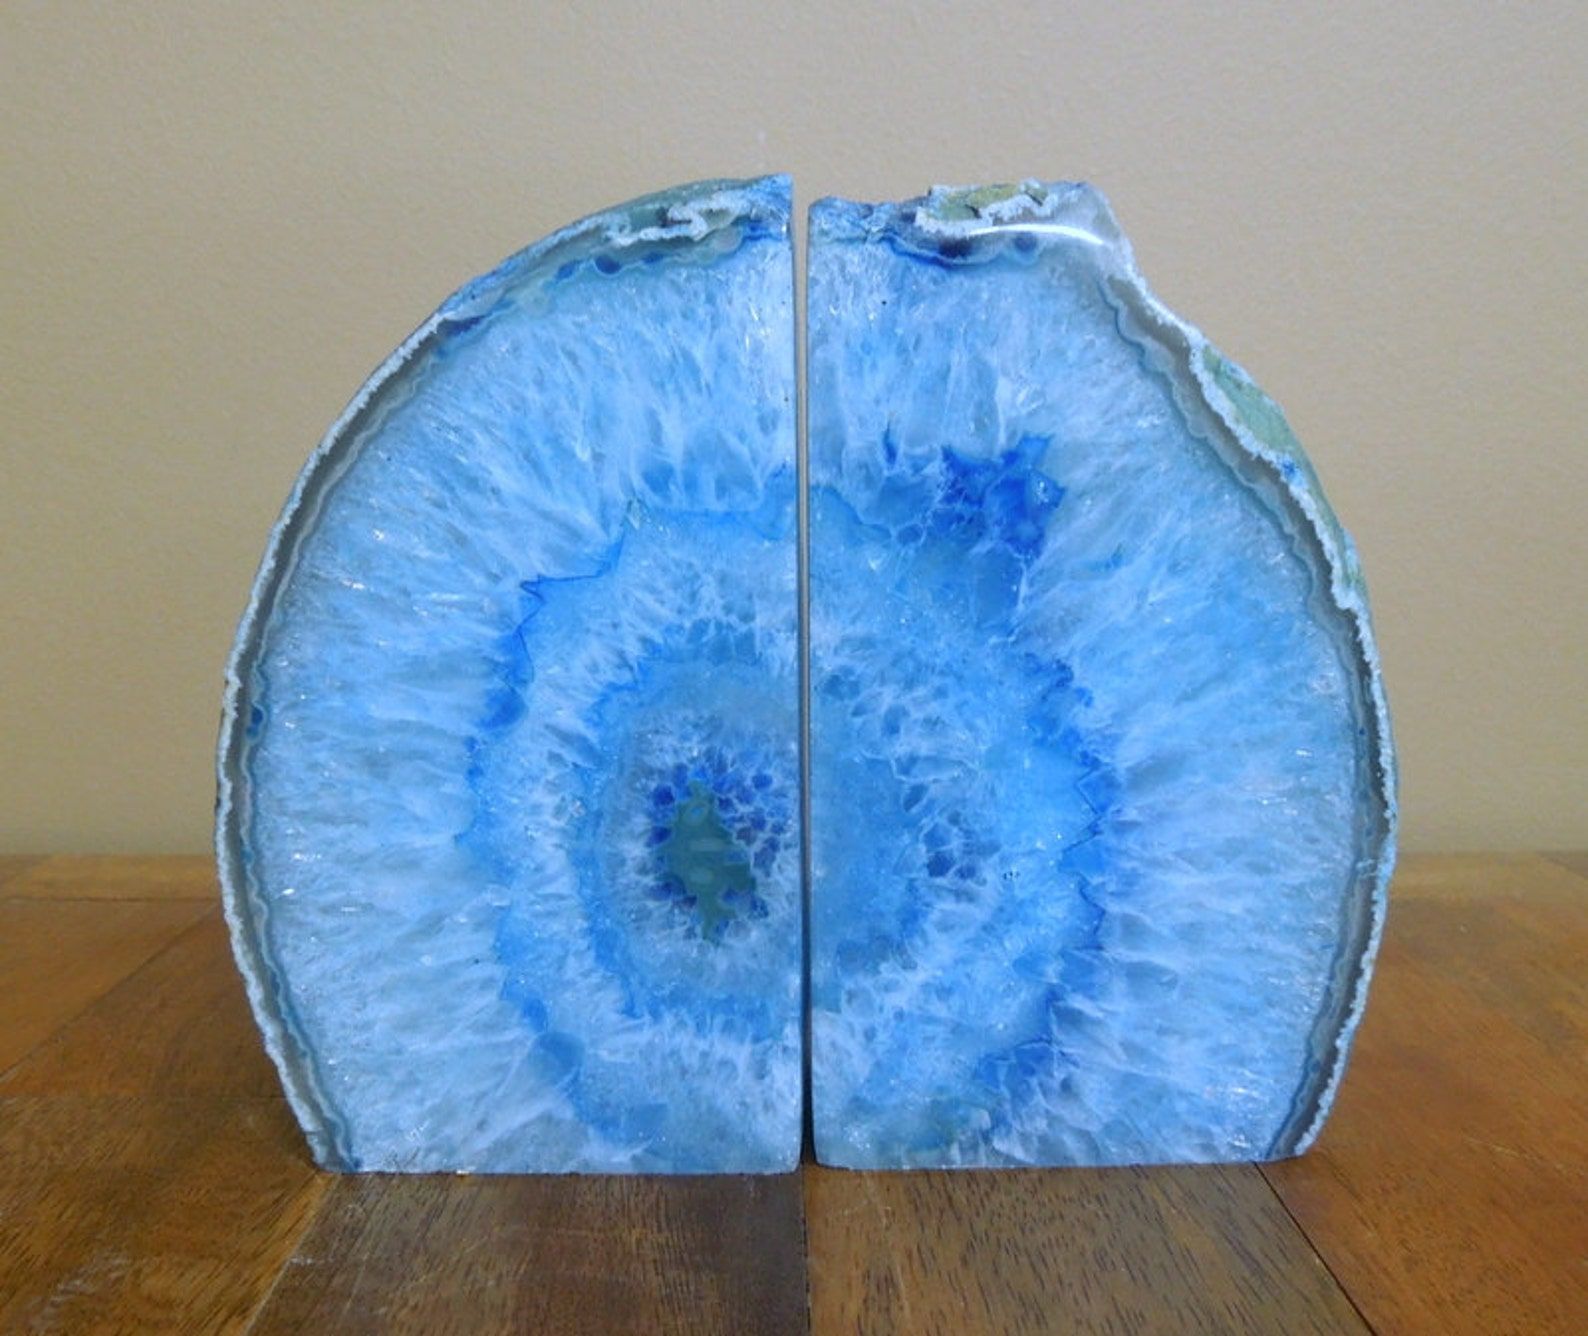 Two sparkly, bright blue agate geode bookends; the two halves together form a round shape.